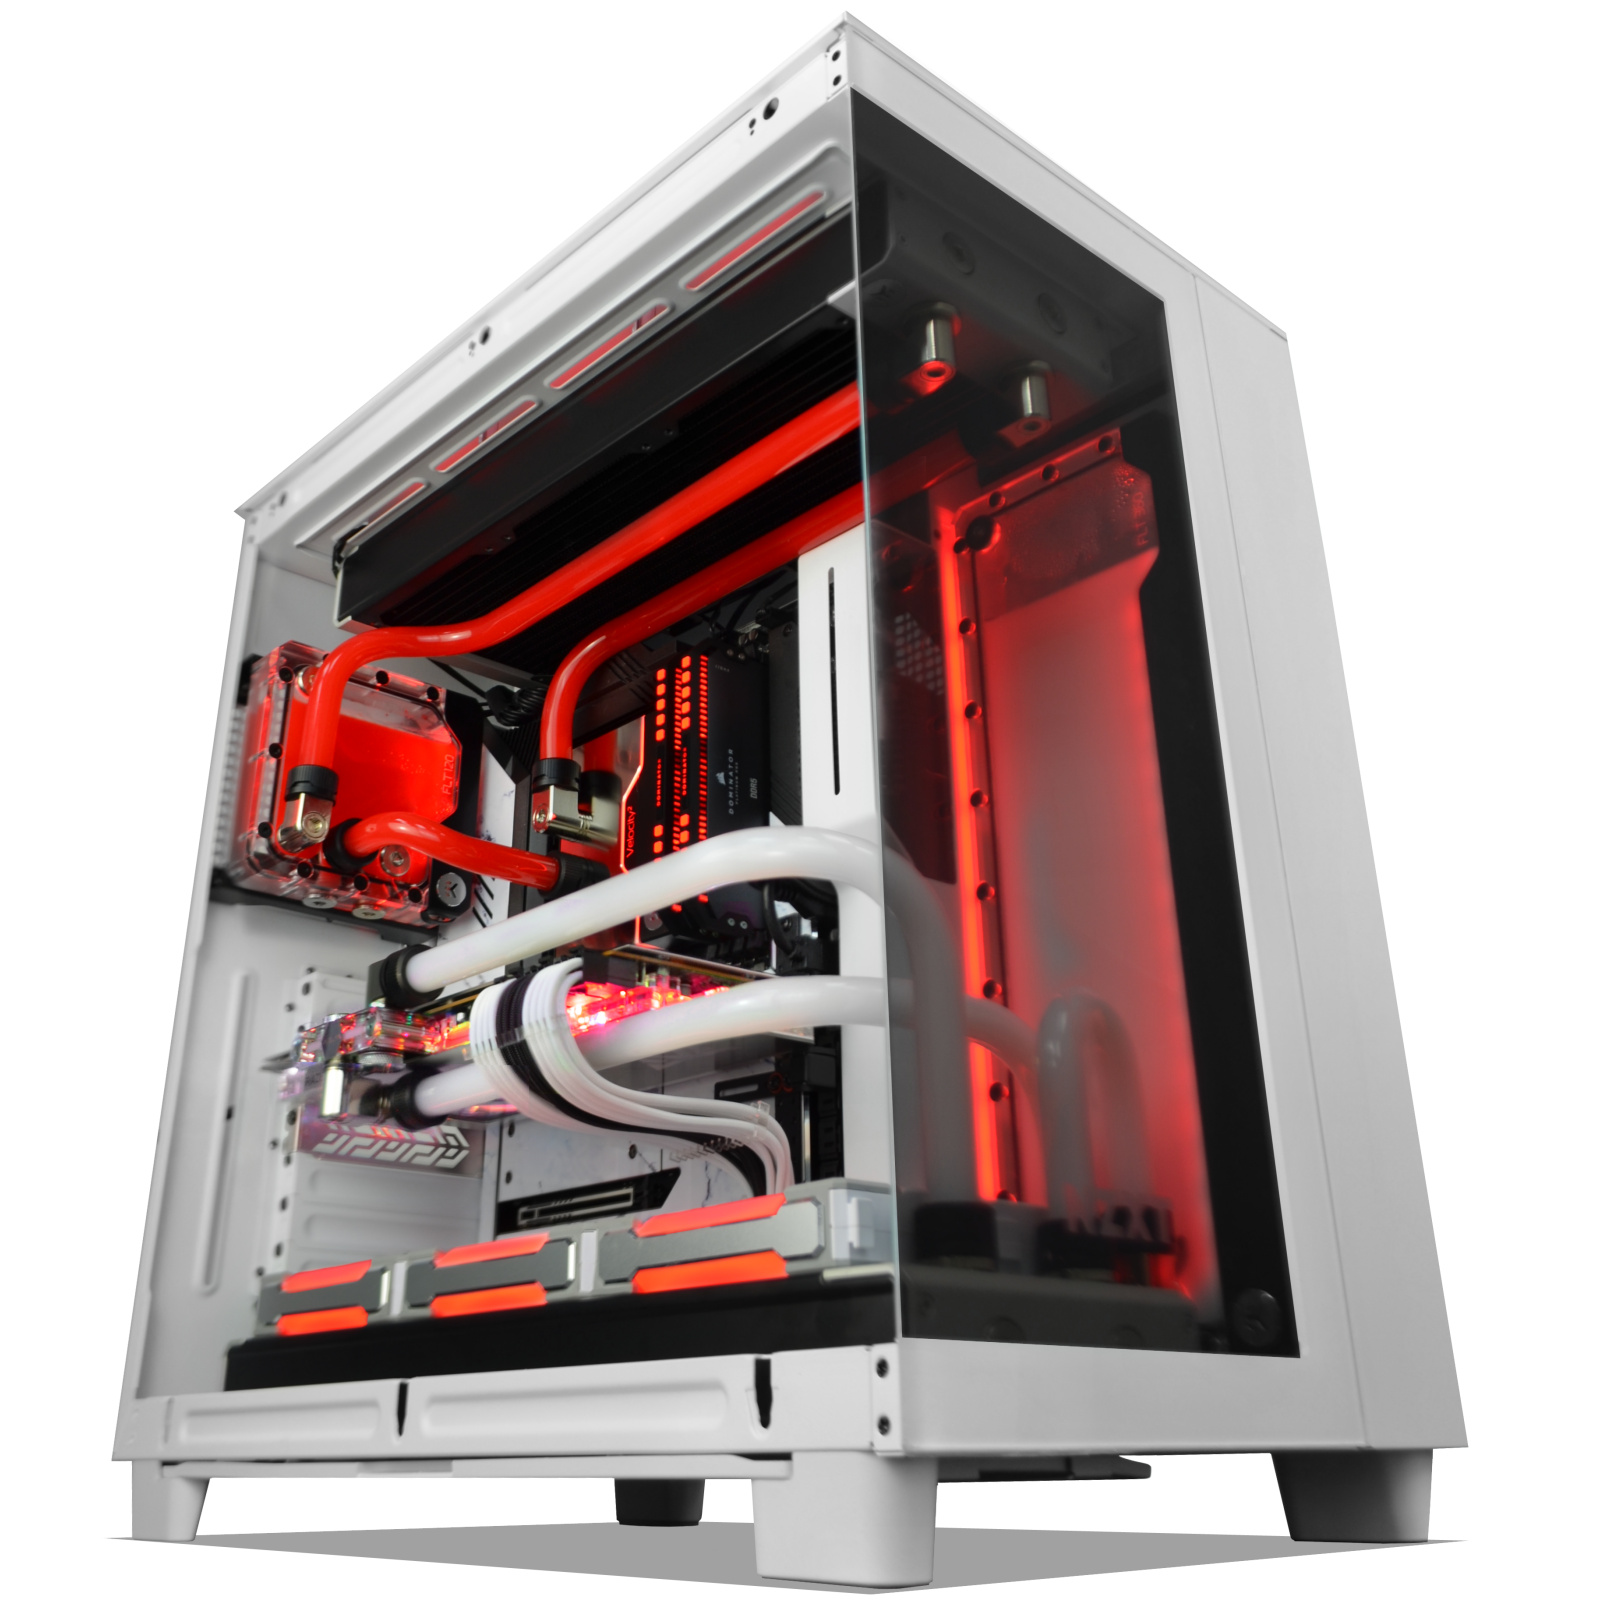 Buy the GGPC RX 7900 Gaming PC AMD 7950X with Custom Water Cooling - 32GB... WKSGGPC70062 ) online - PBTech.com/pacific